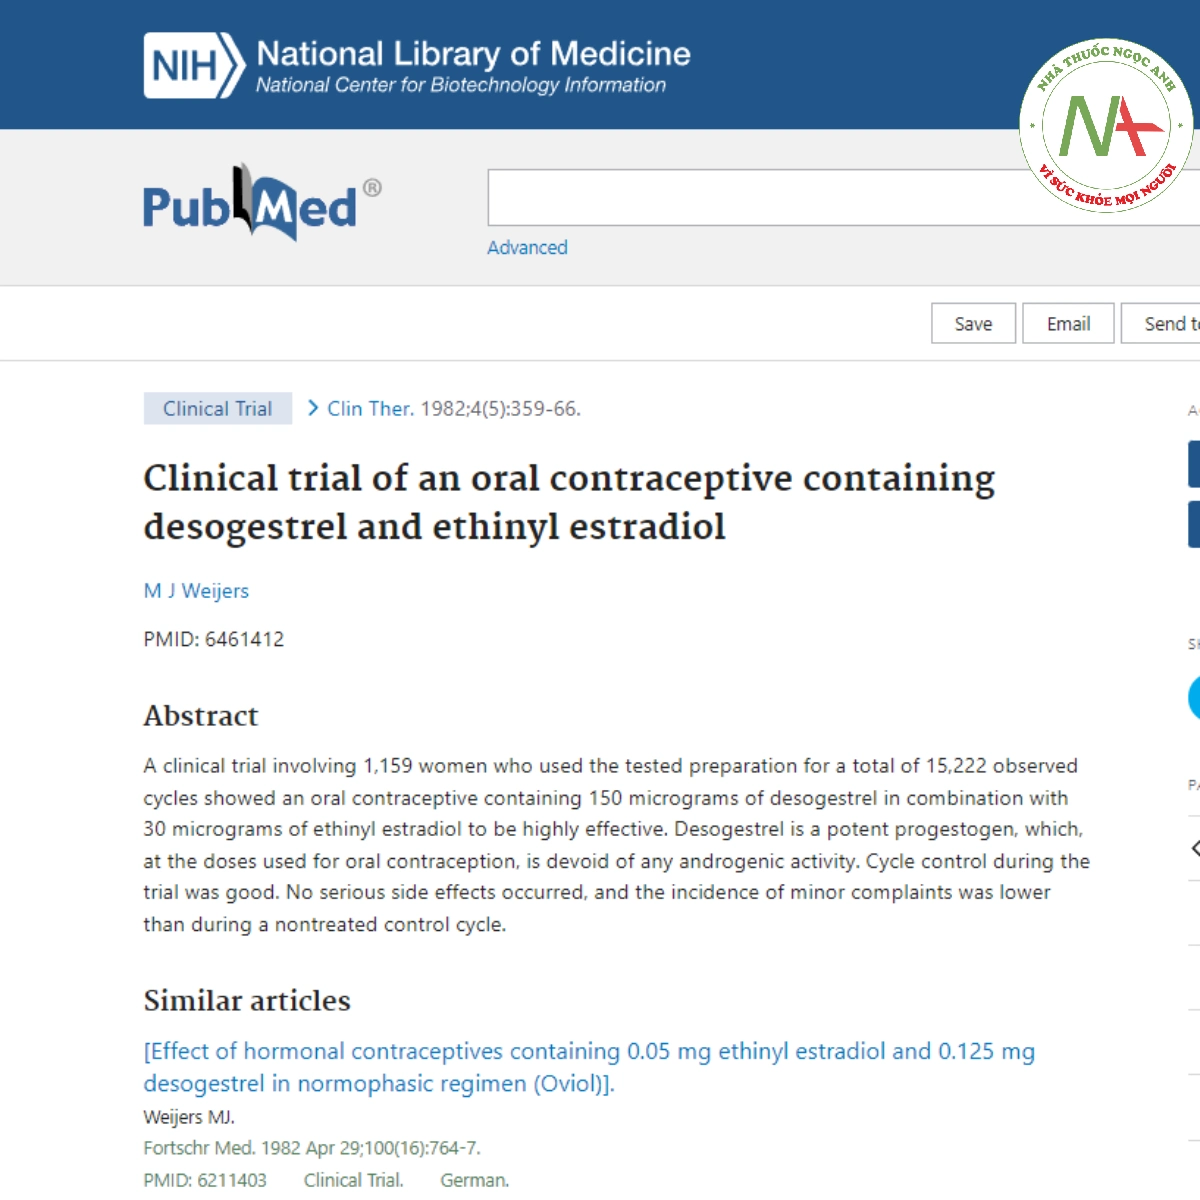 Clinical trial of an oral contraceptive containing desogestrel and ethinyl estradiol